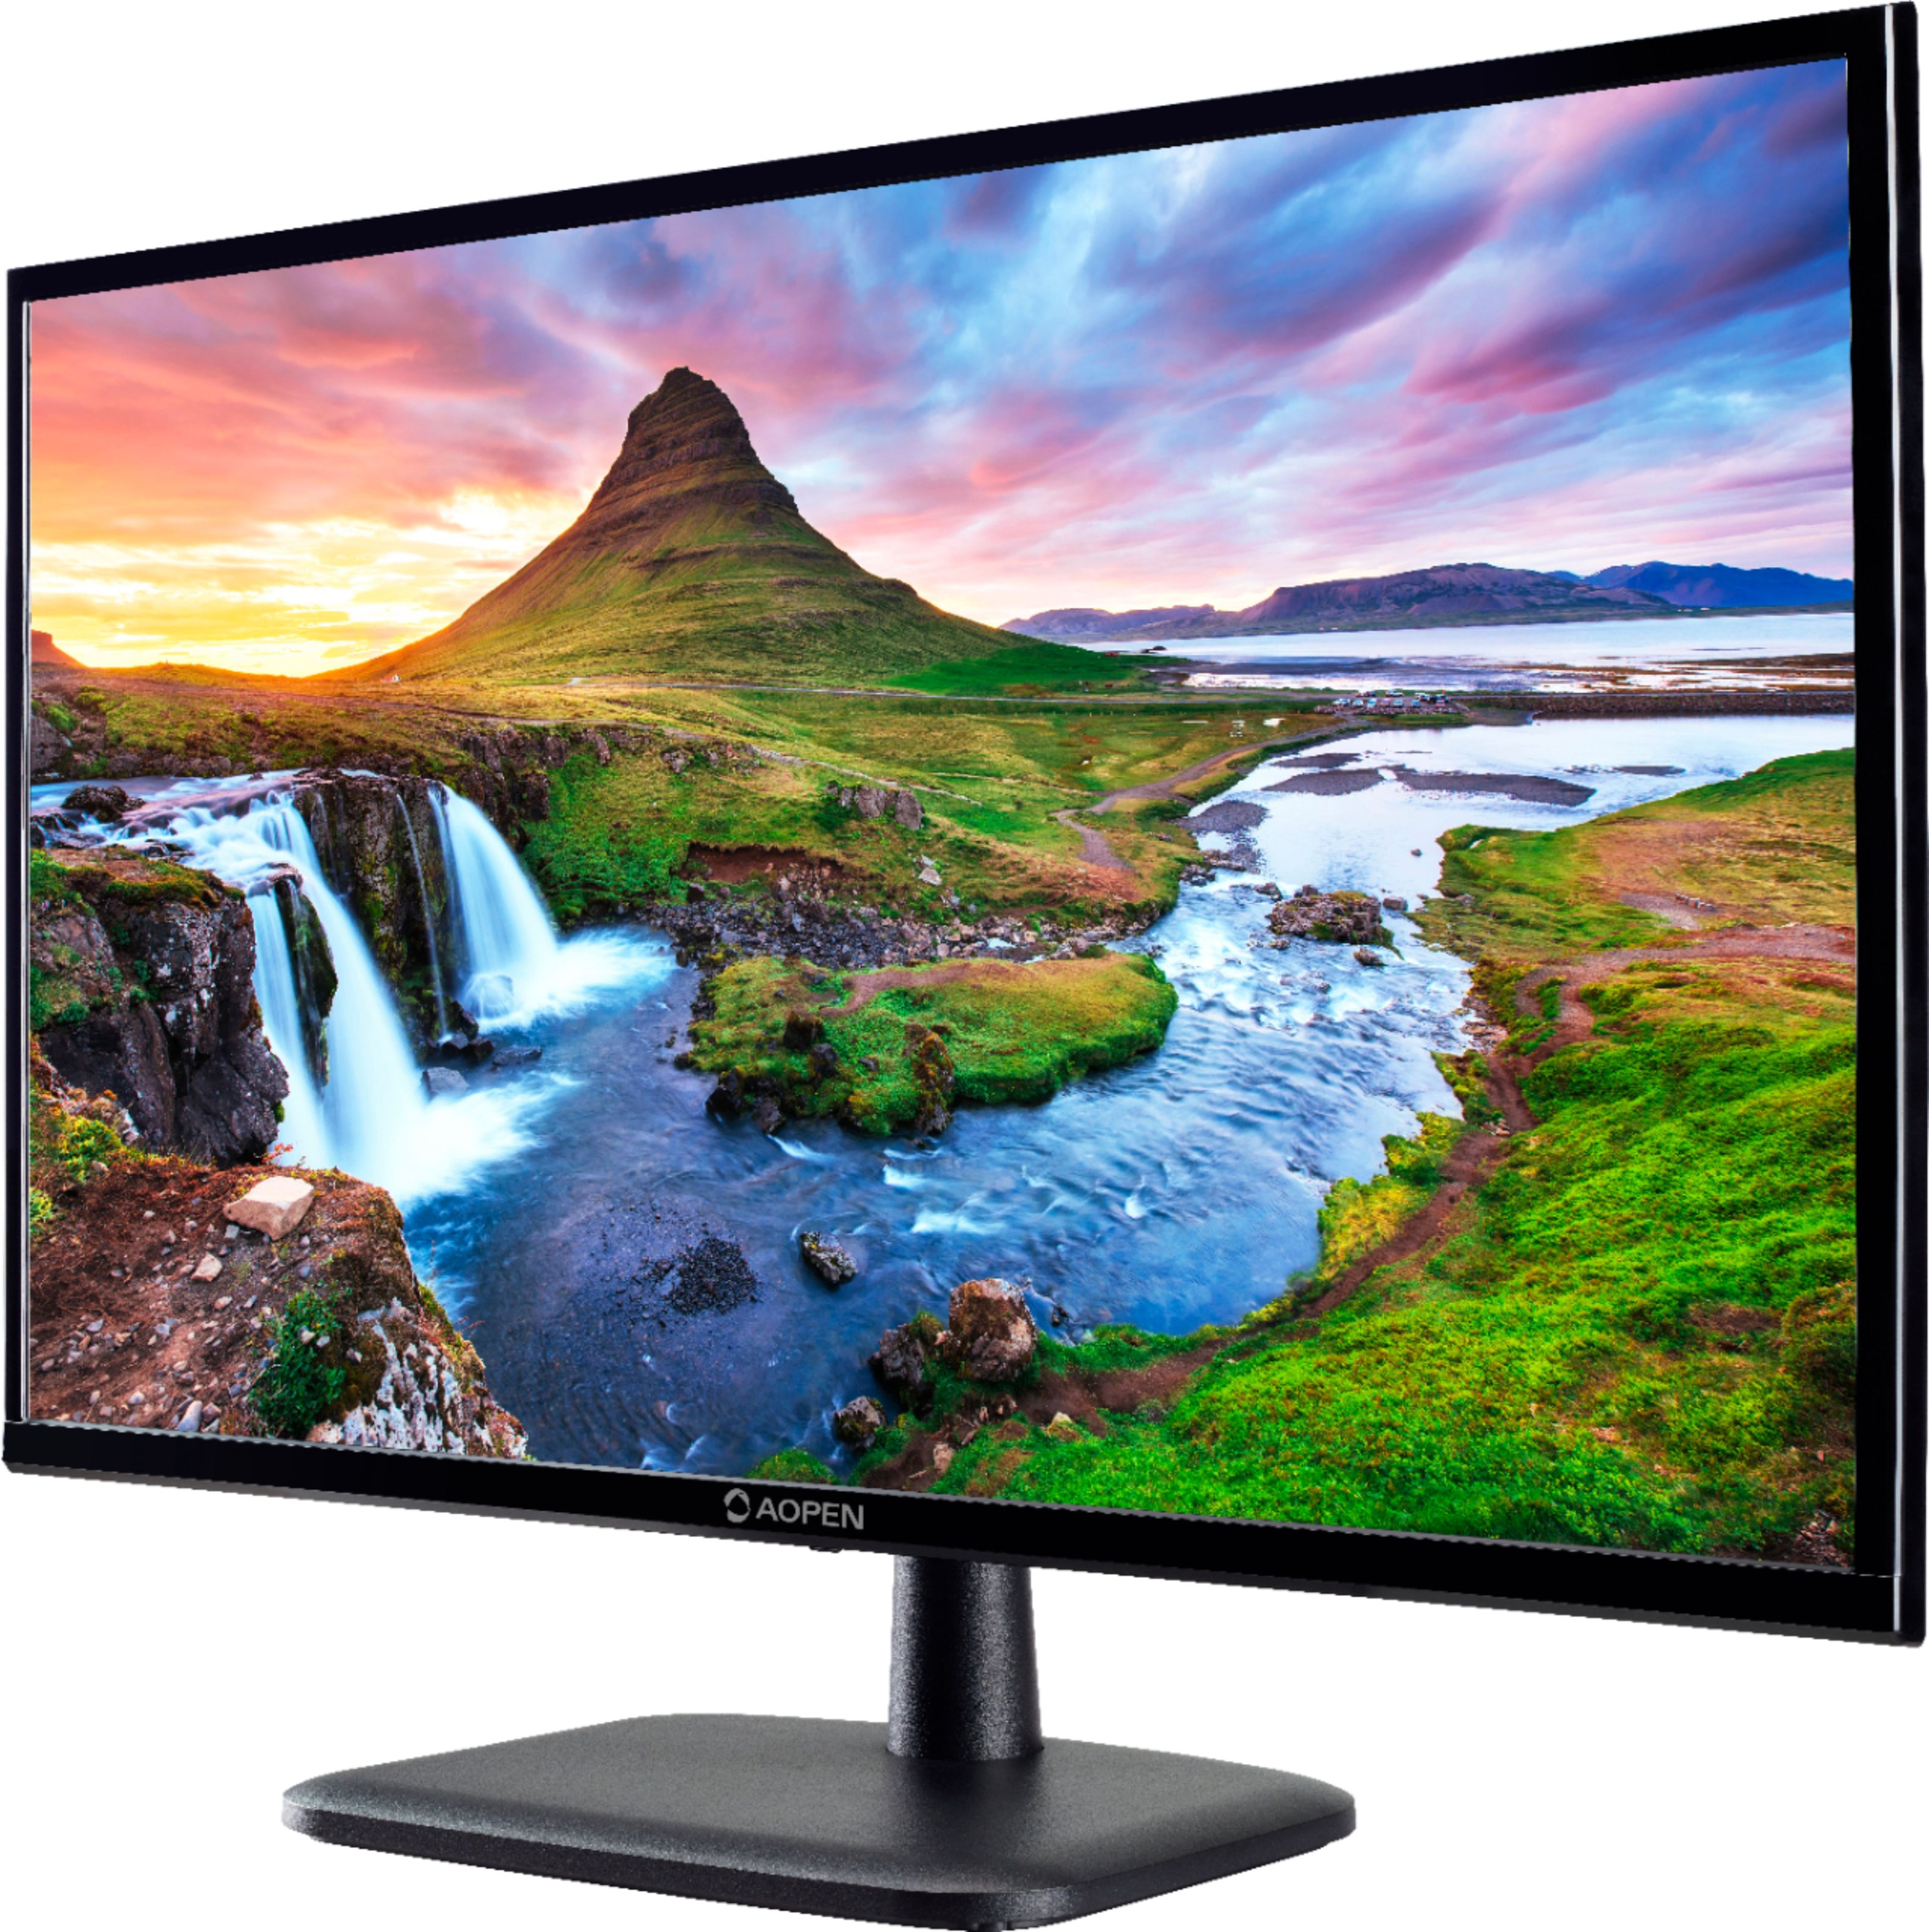 Angle View: AOpen - 24CL1Y bi 23.8-inch FHD Monitor (HDMI)